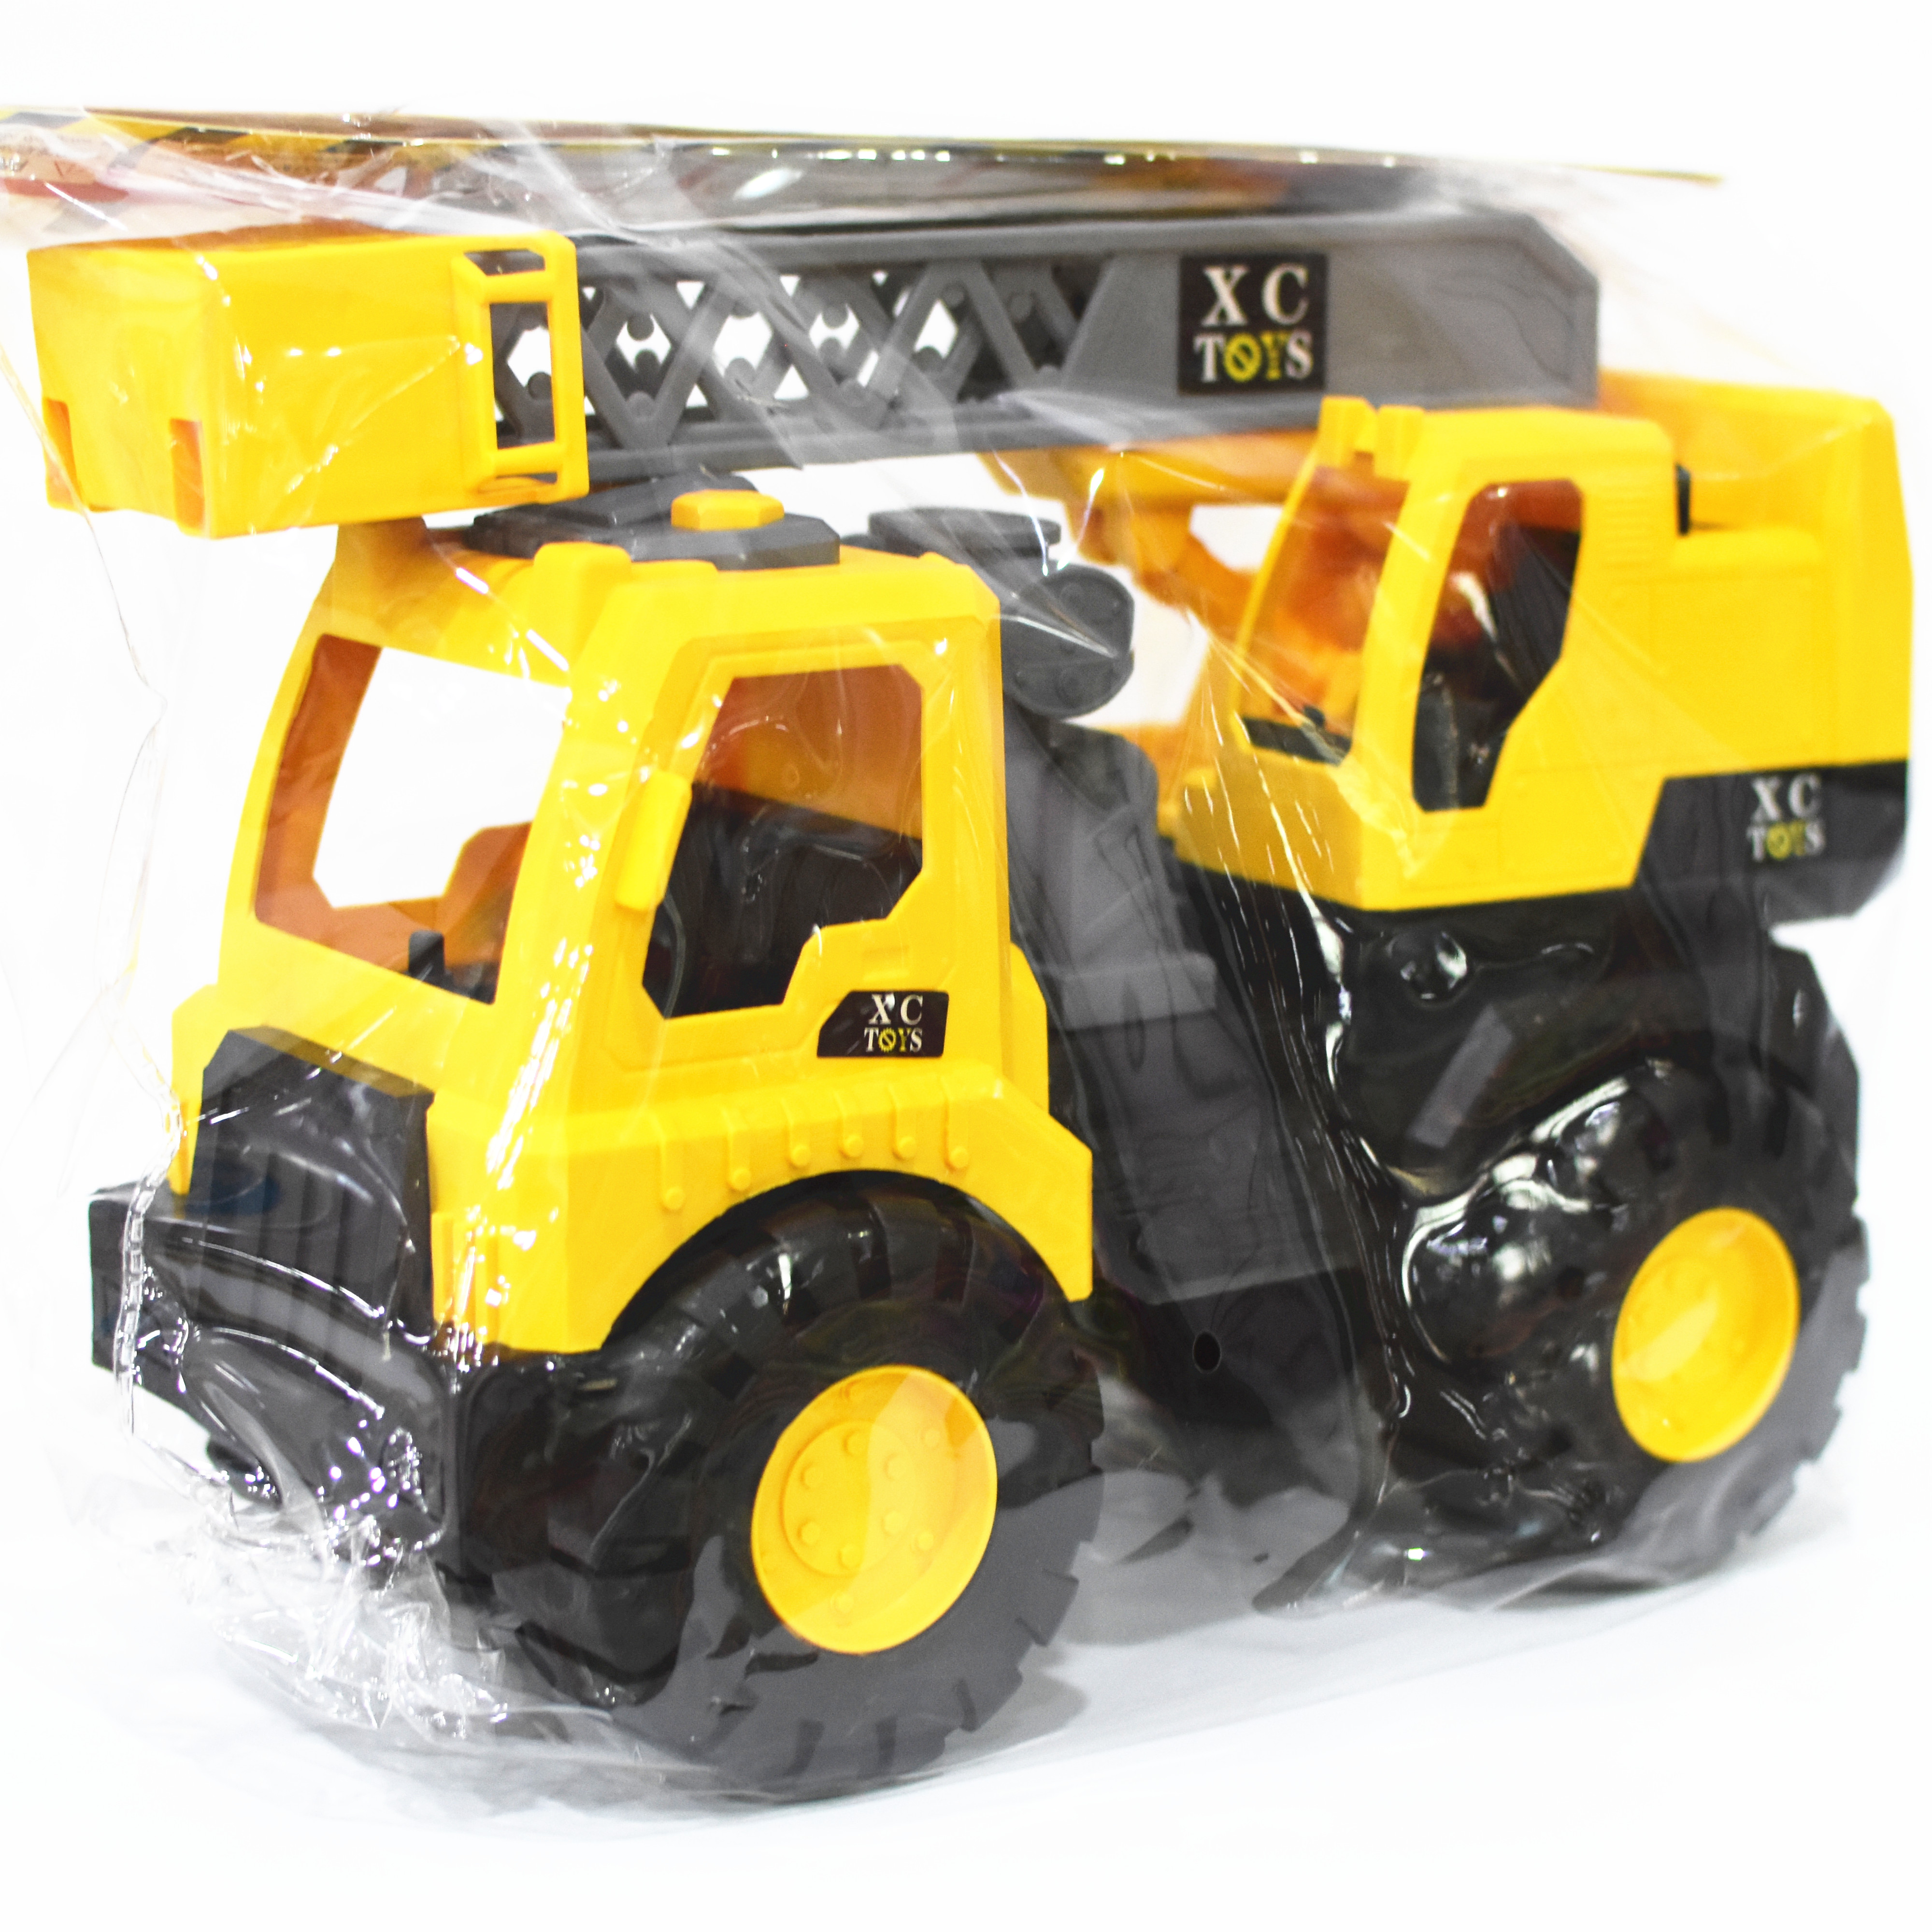 FREE WHEEL TRUCK TOY LY1350